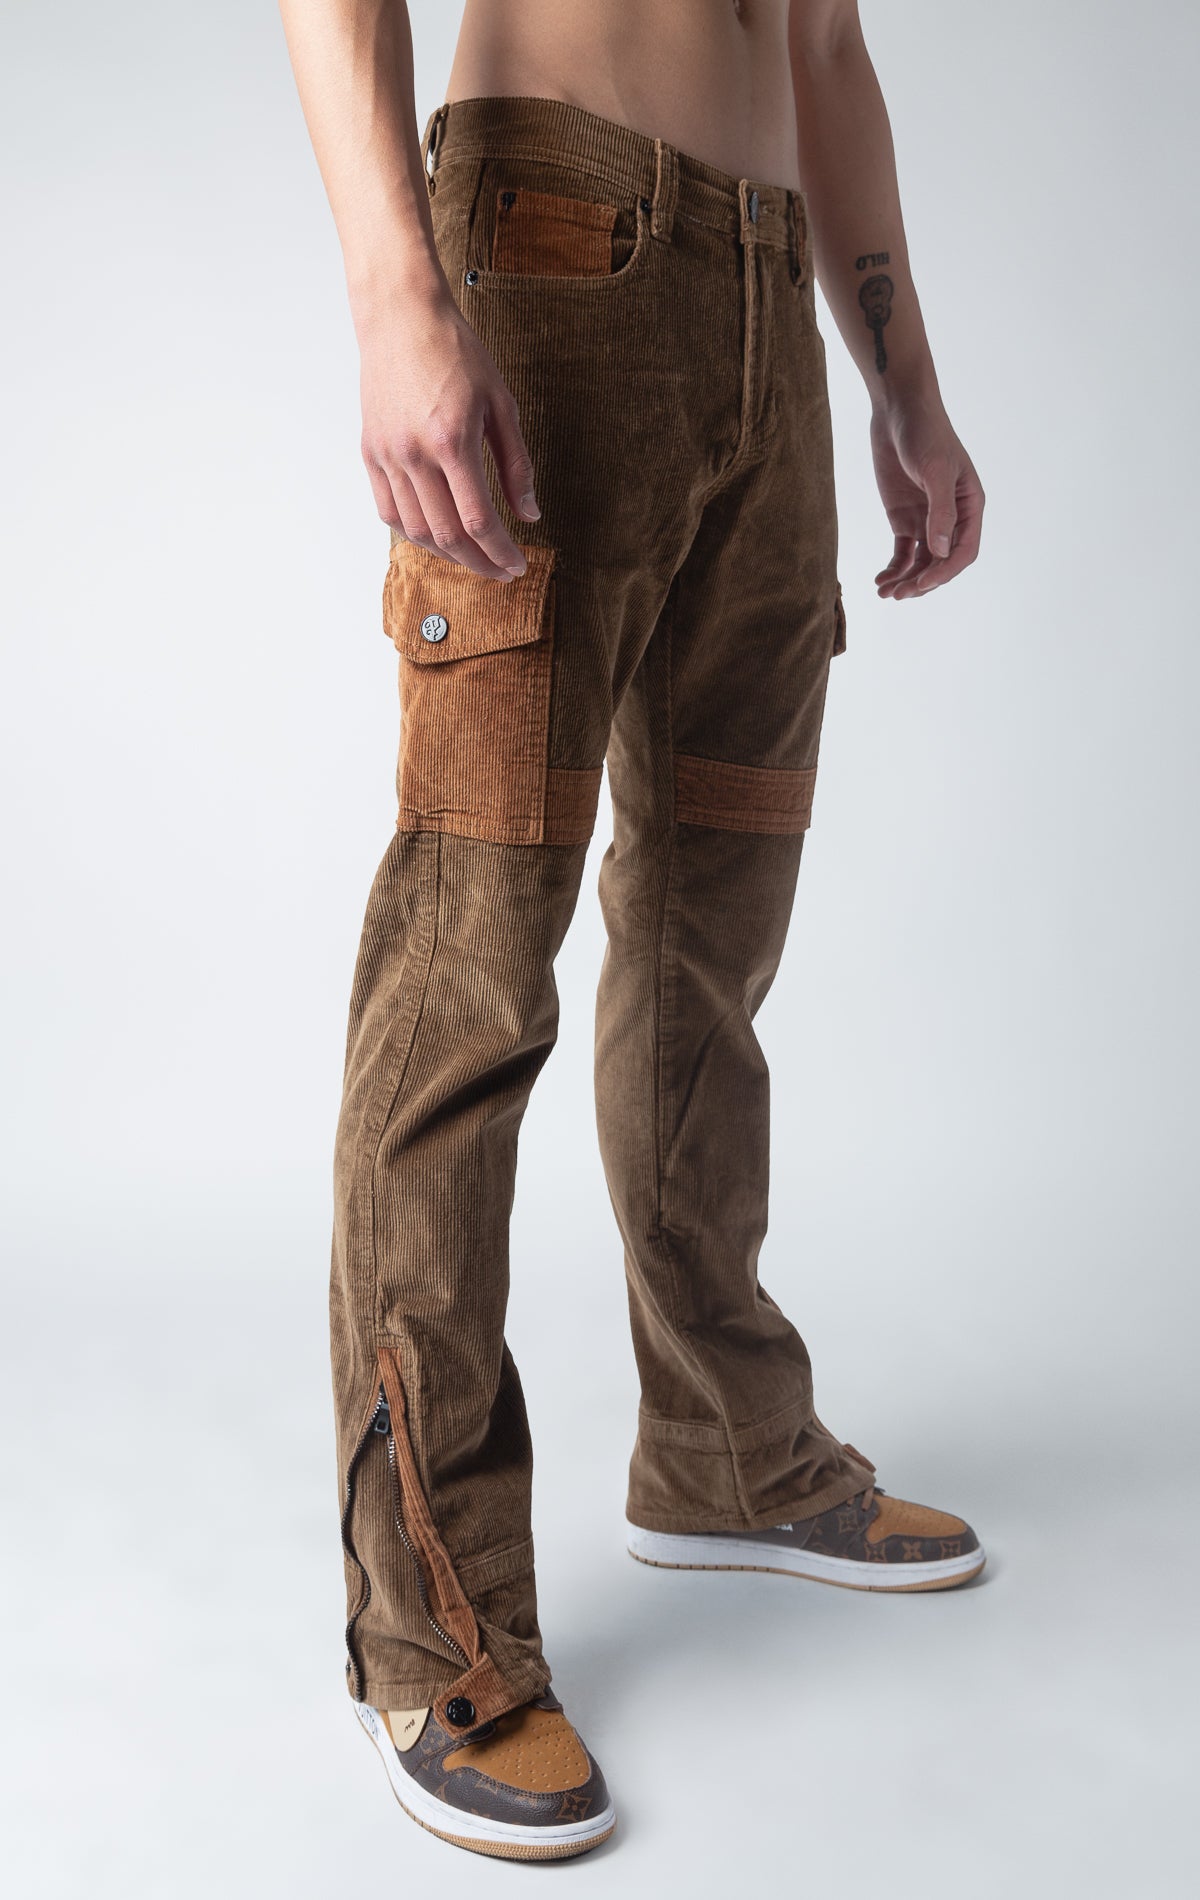 Mocha corduroy jeans&nbsp;with semi-stacked flares and sumptuous corduroy accents